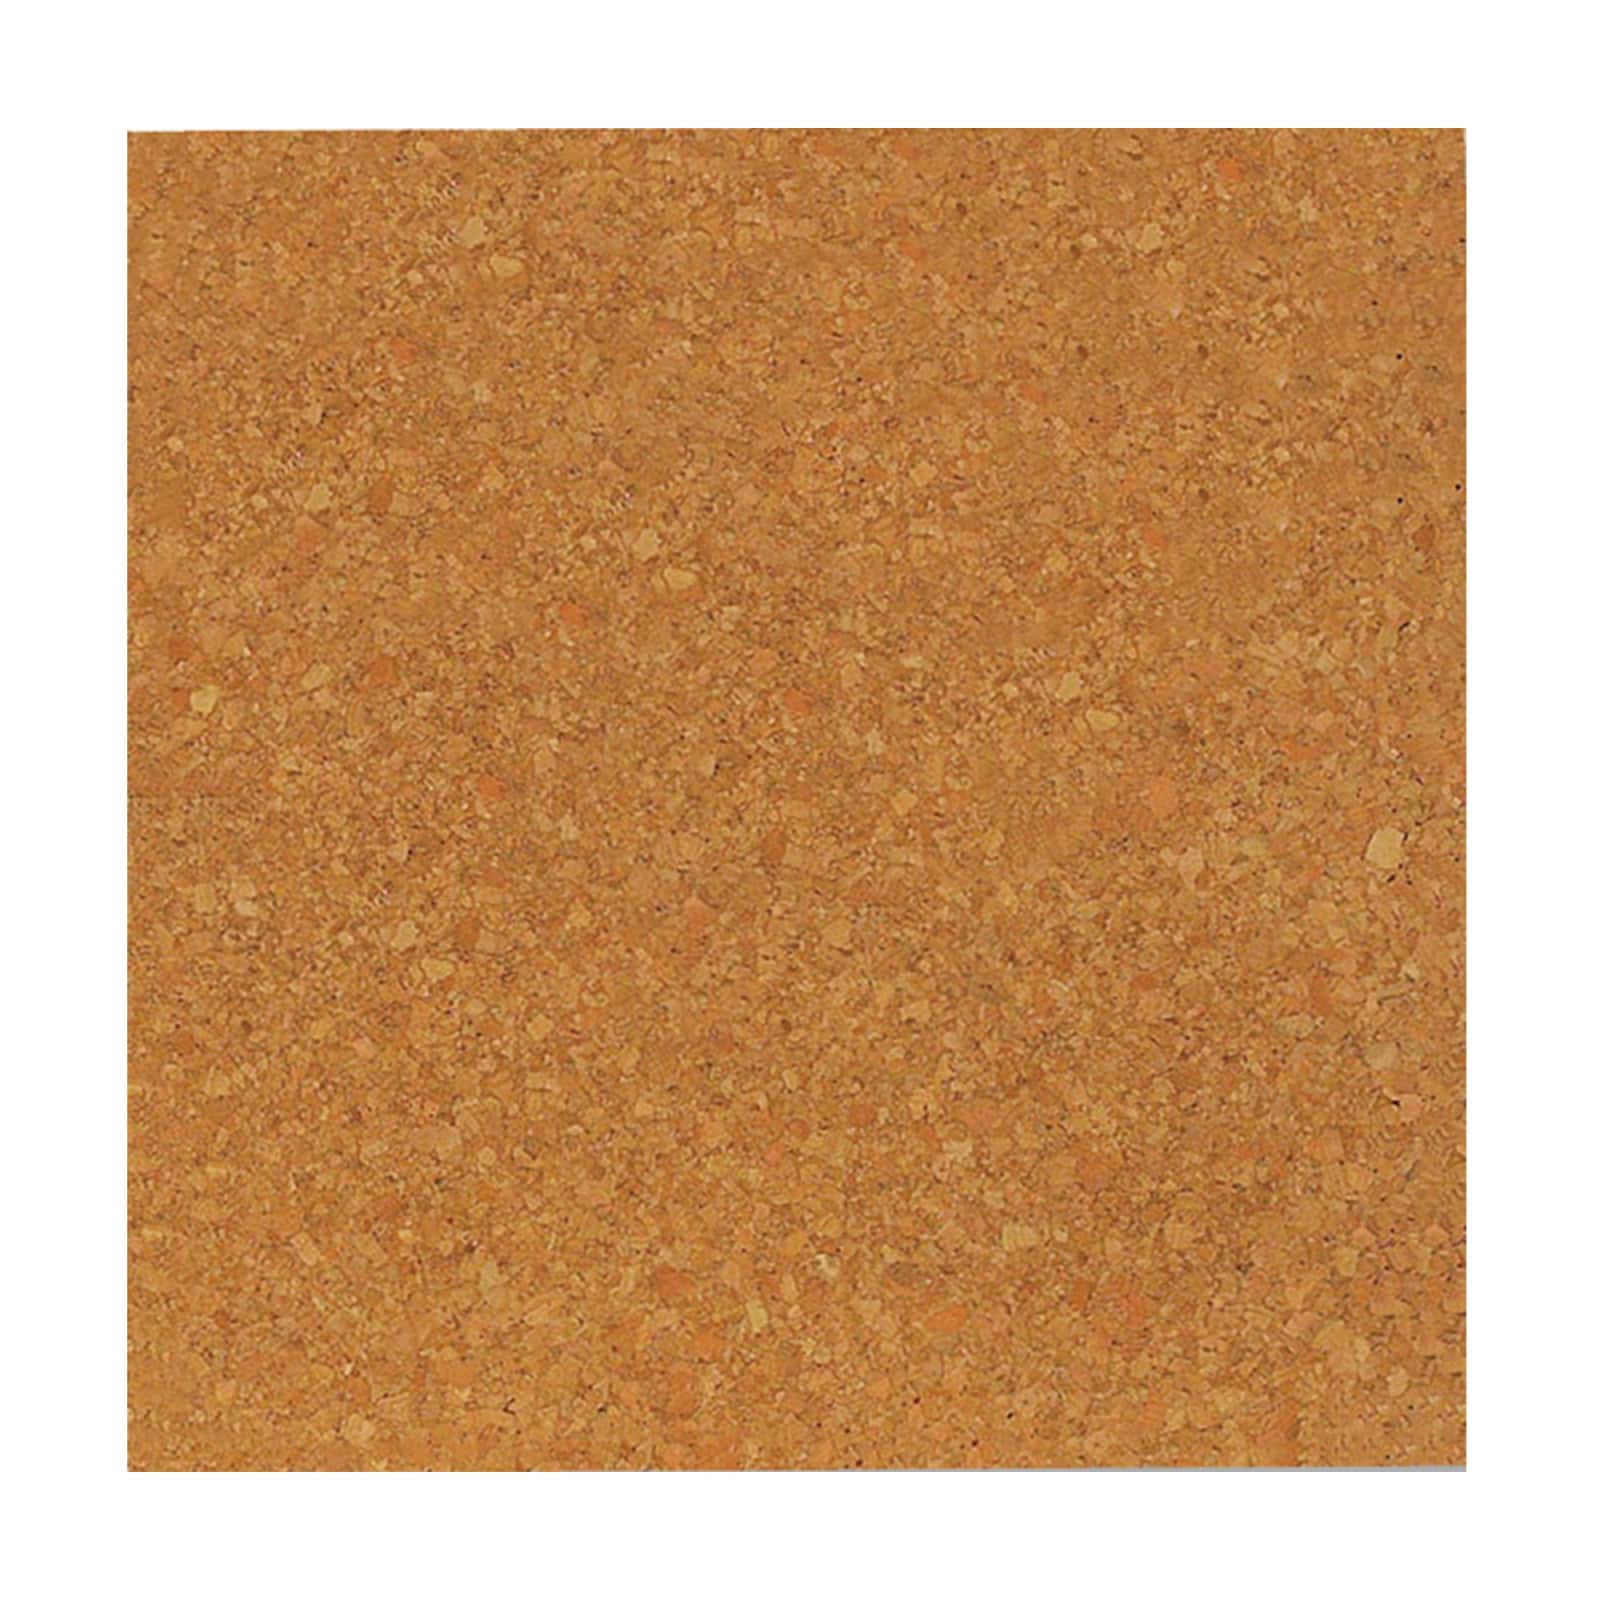 Incraftables Adhesive Cork Board Tiles (5pcs - 12 x 12 inch Squares). Thick  Frameless Cork Board for Wall, Office & Home. Best Large Cork Squares Self Adhesive  Sheets with Clips Pins 